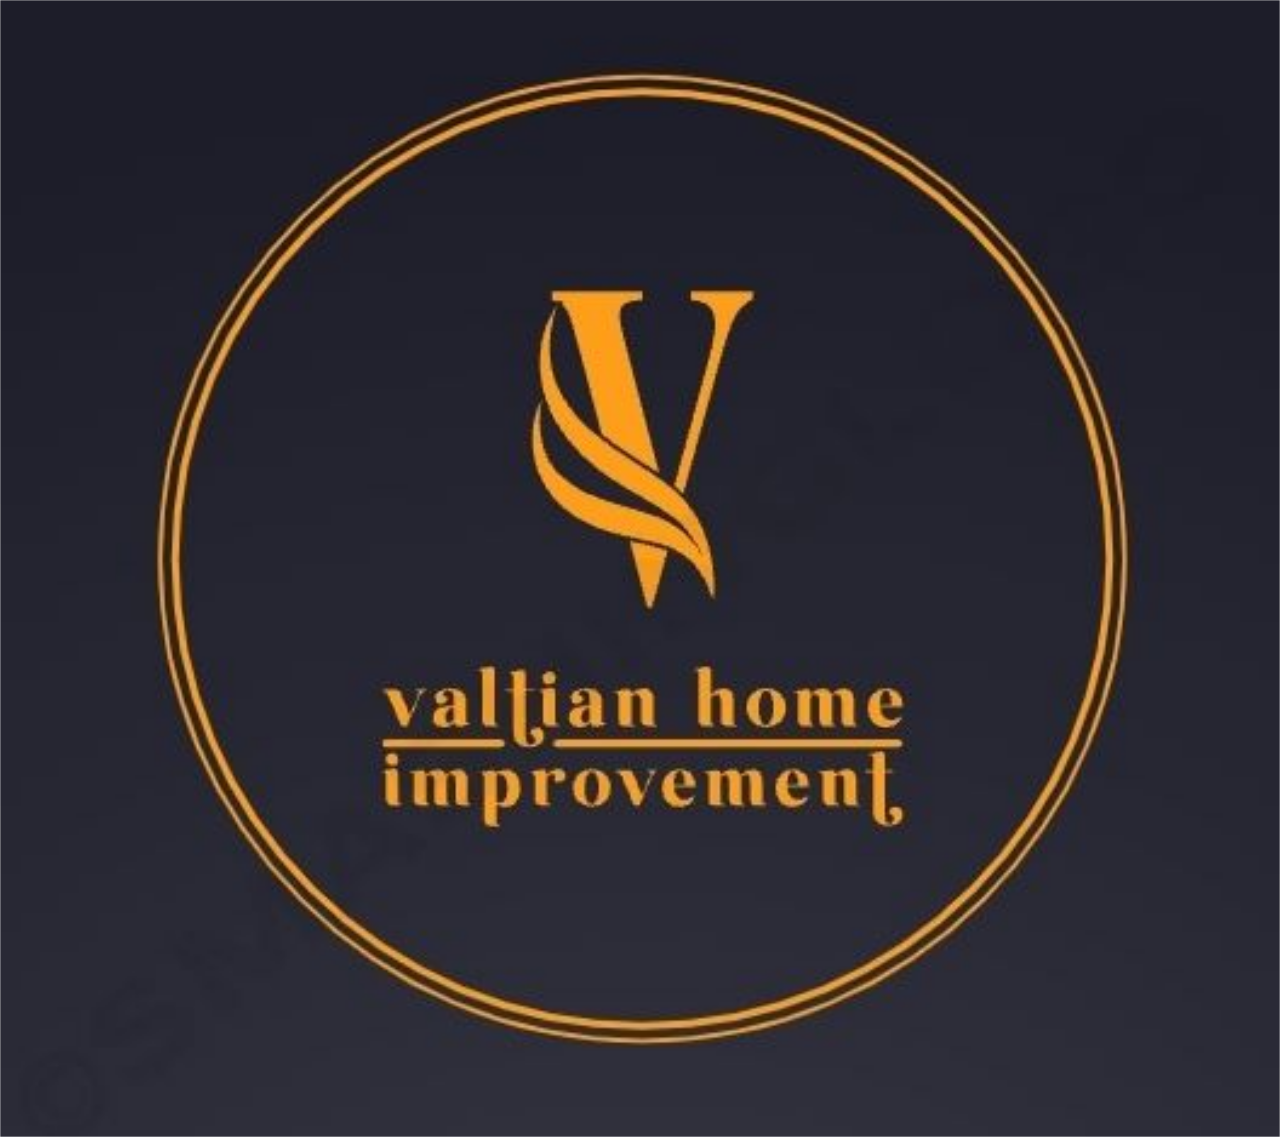 VALTIAN 's web page